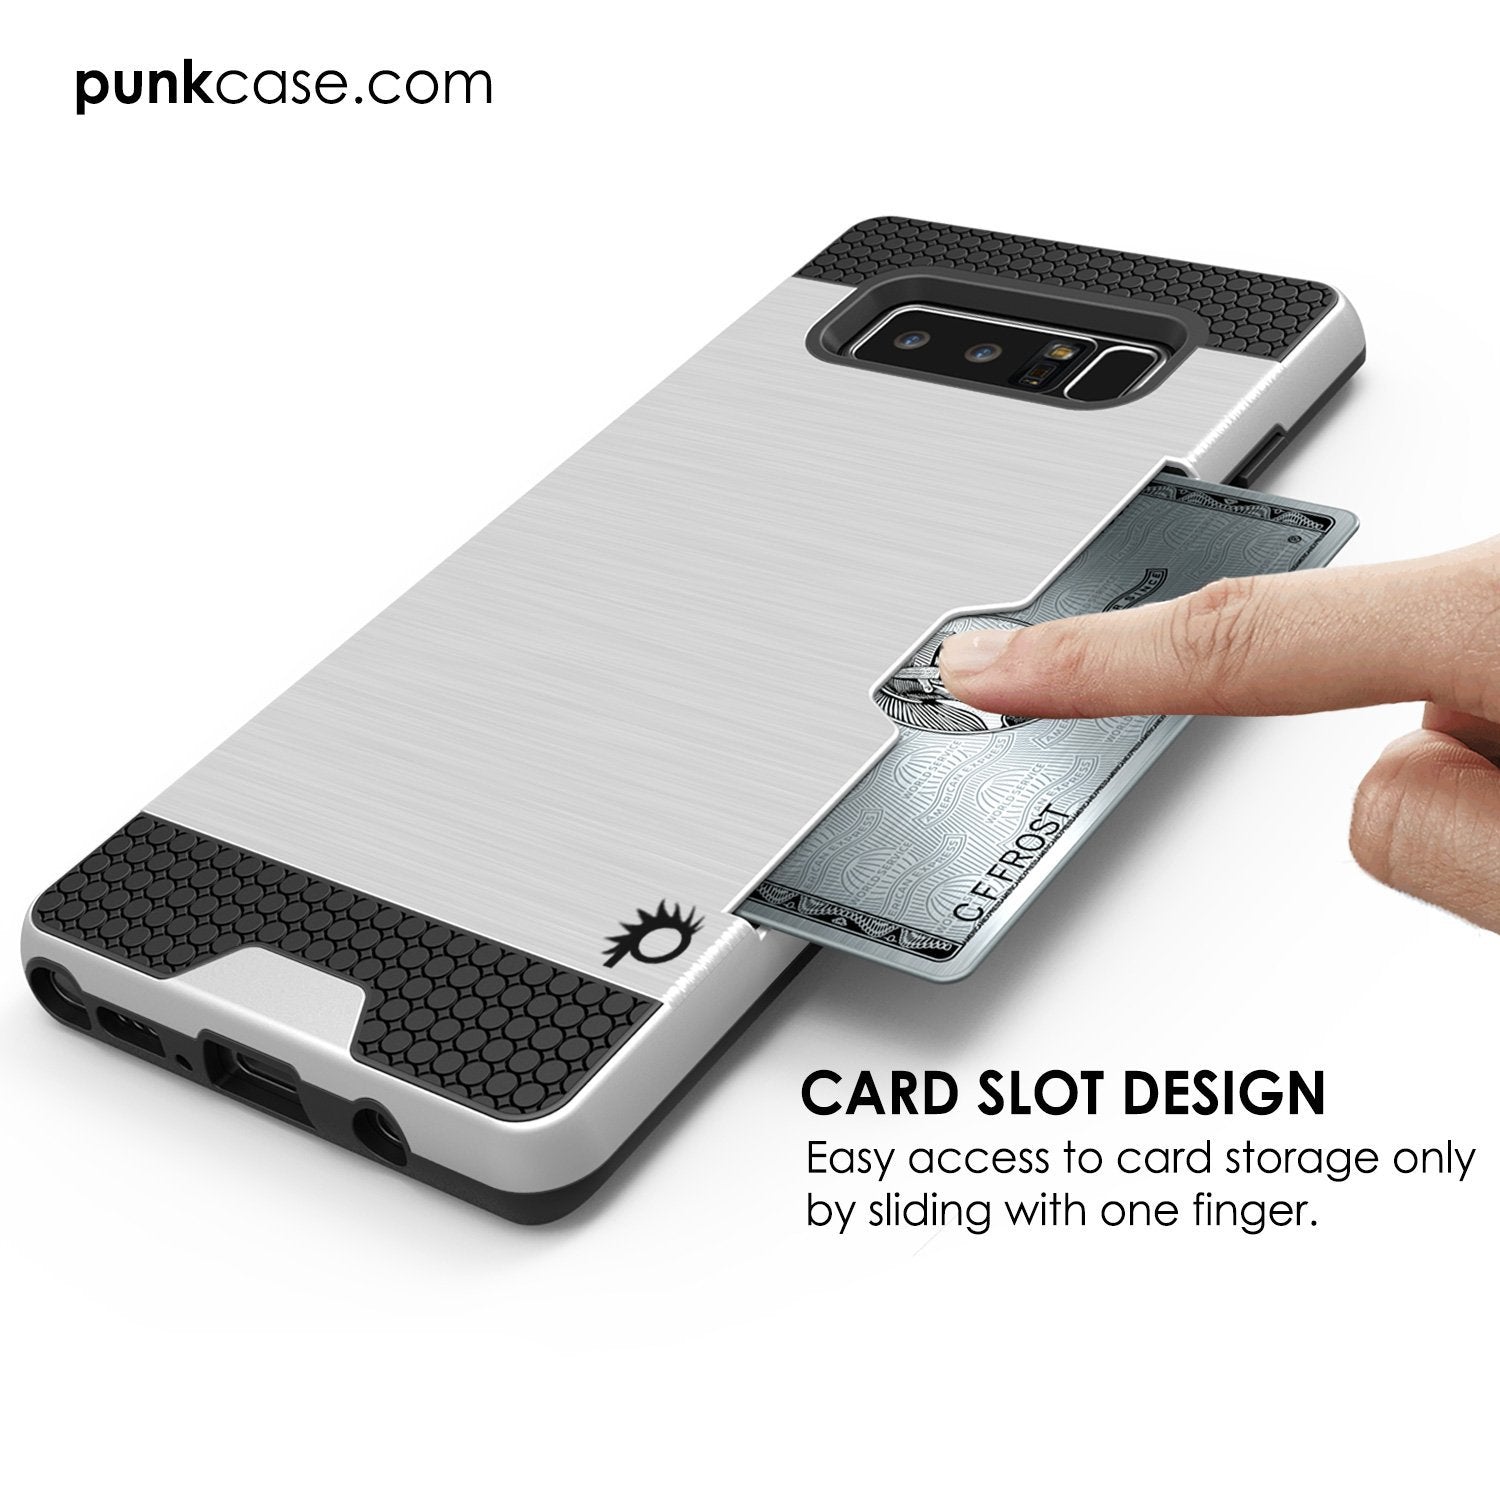 Galaxy Note 8 Case, PUNKcase [SLOT Series] Slim Fit with Screen Protector for Samsung Note 8 [Silver] - PunkCase NZ